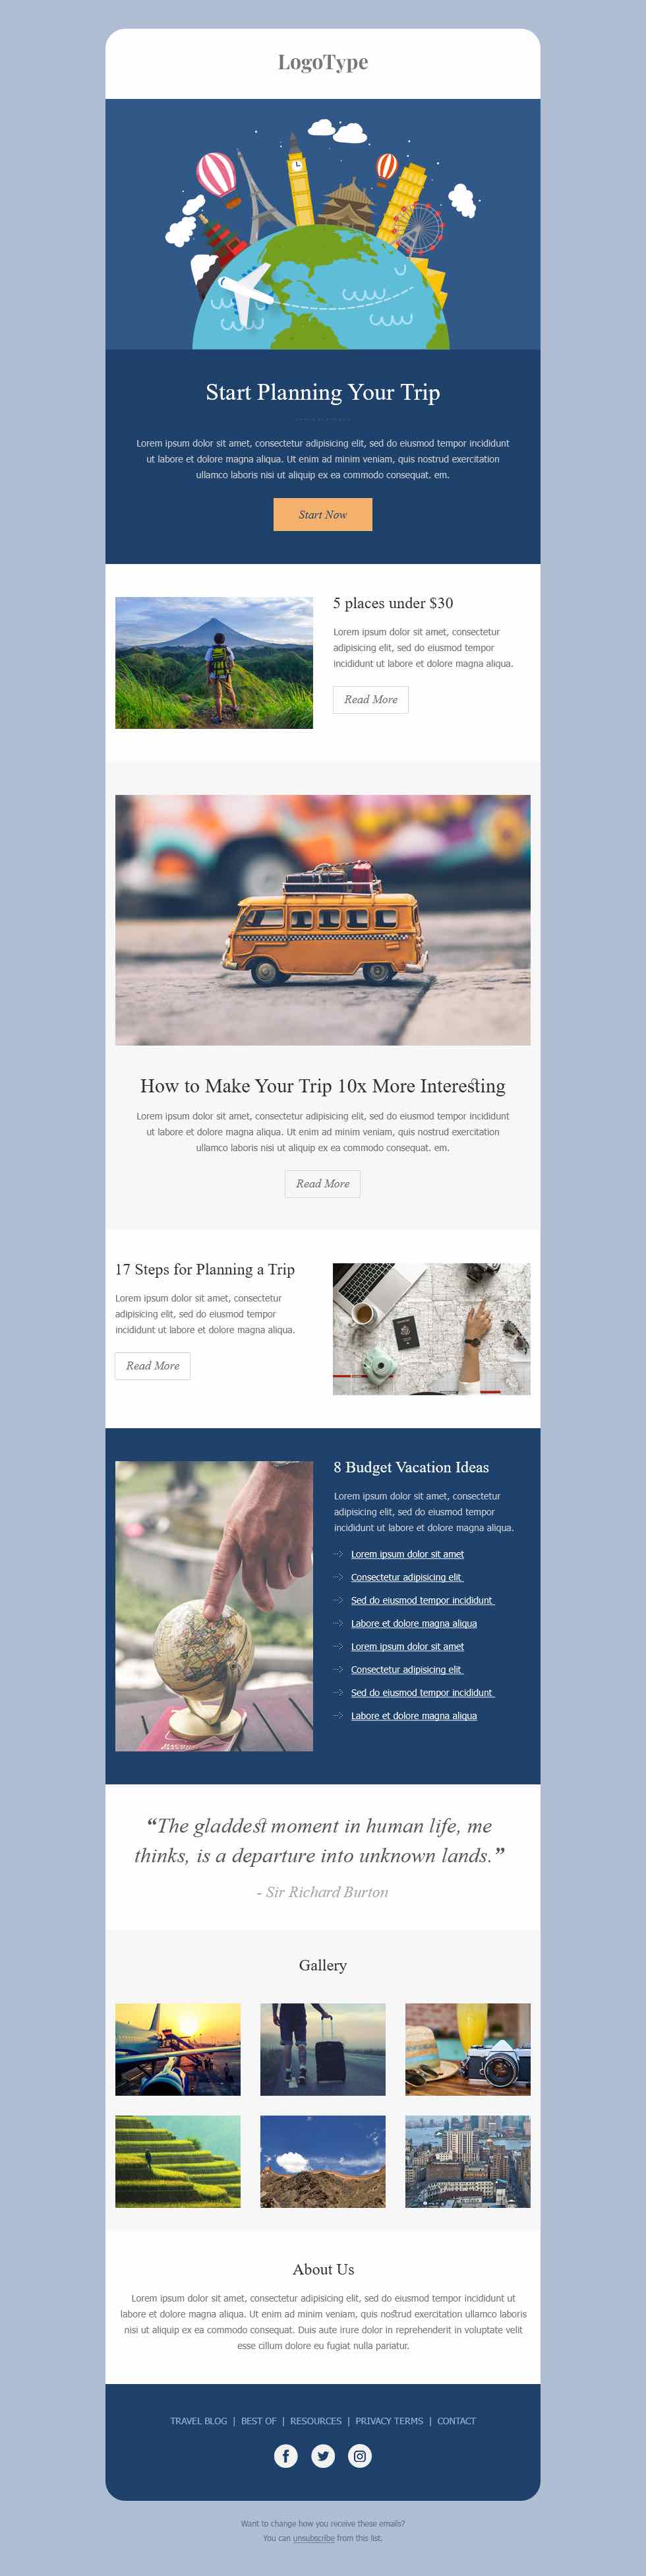 Responsive HTML email newsletter template for travel. Works great for folks having travel & holiday services.